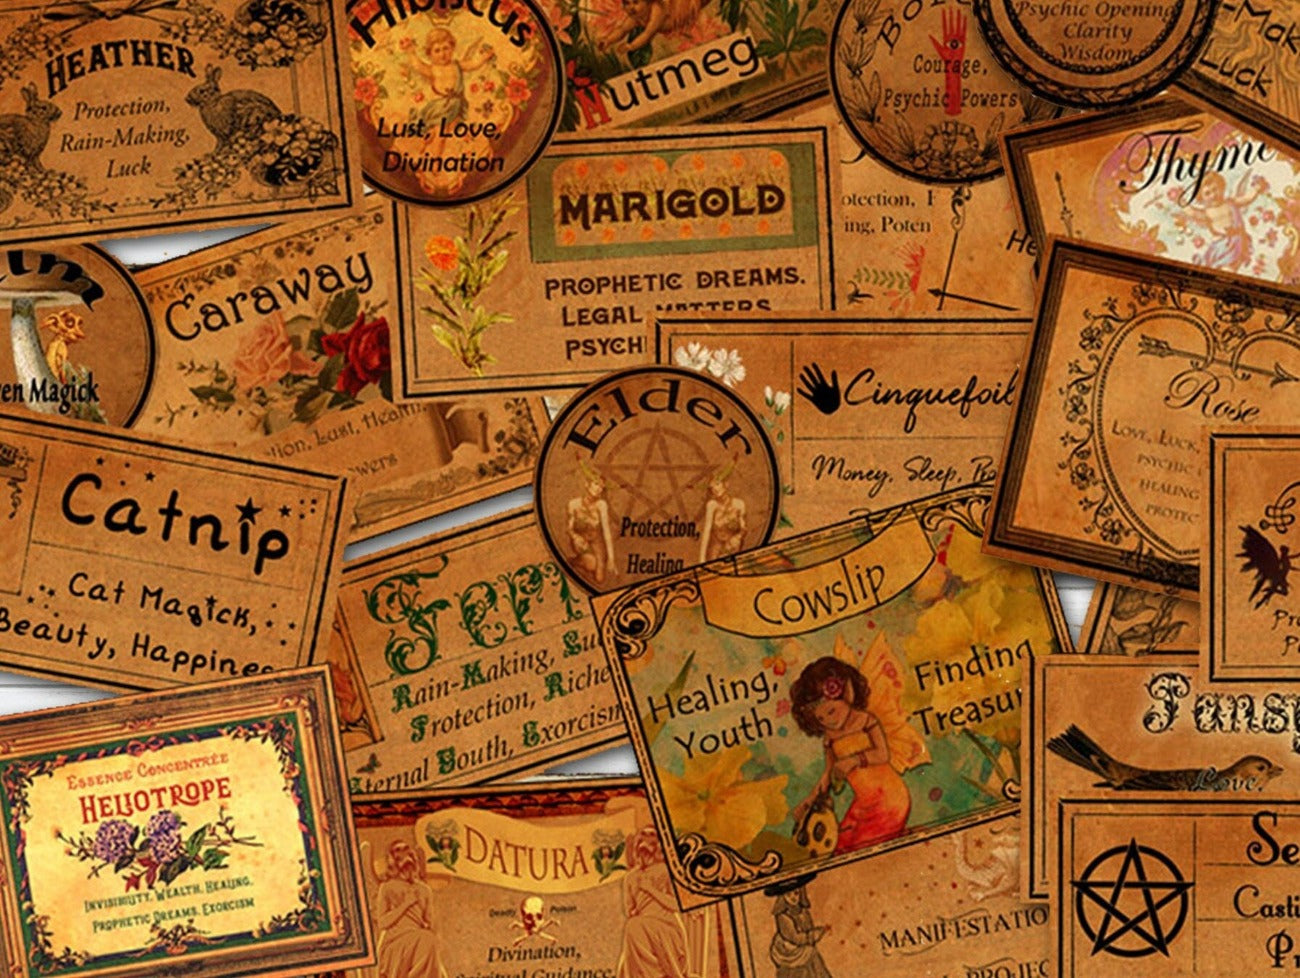 70 WITCHCRAFT LABELS Printable Herbs and their Magickal Uses - Morgana Magick Spell